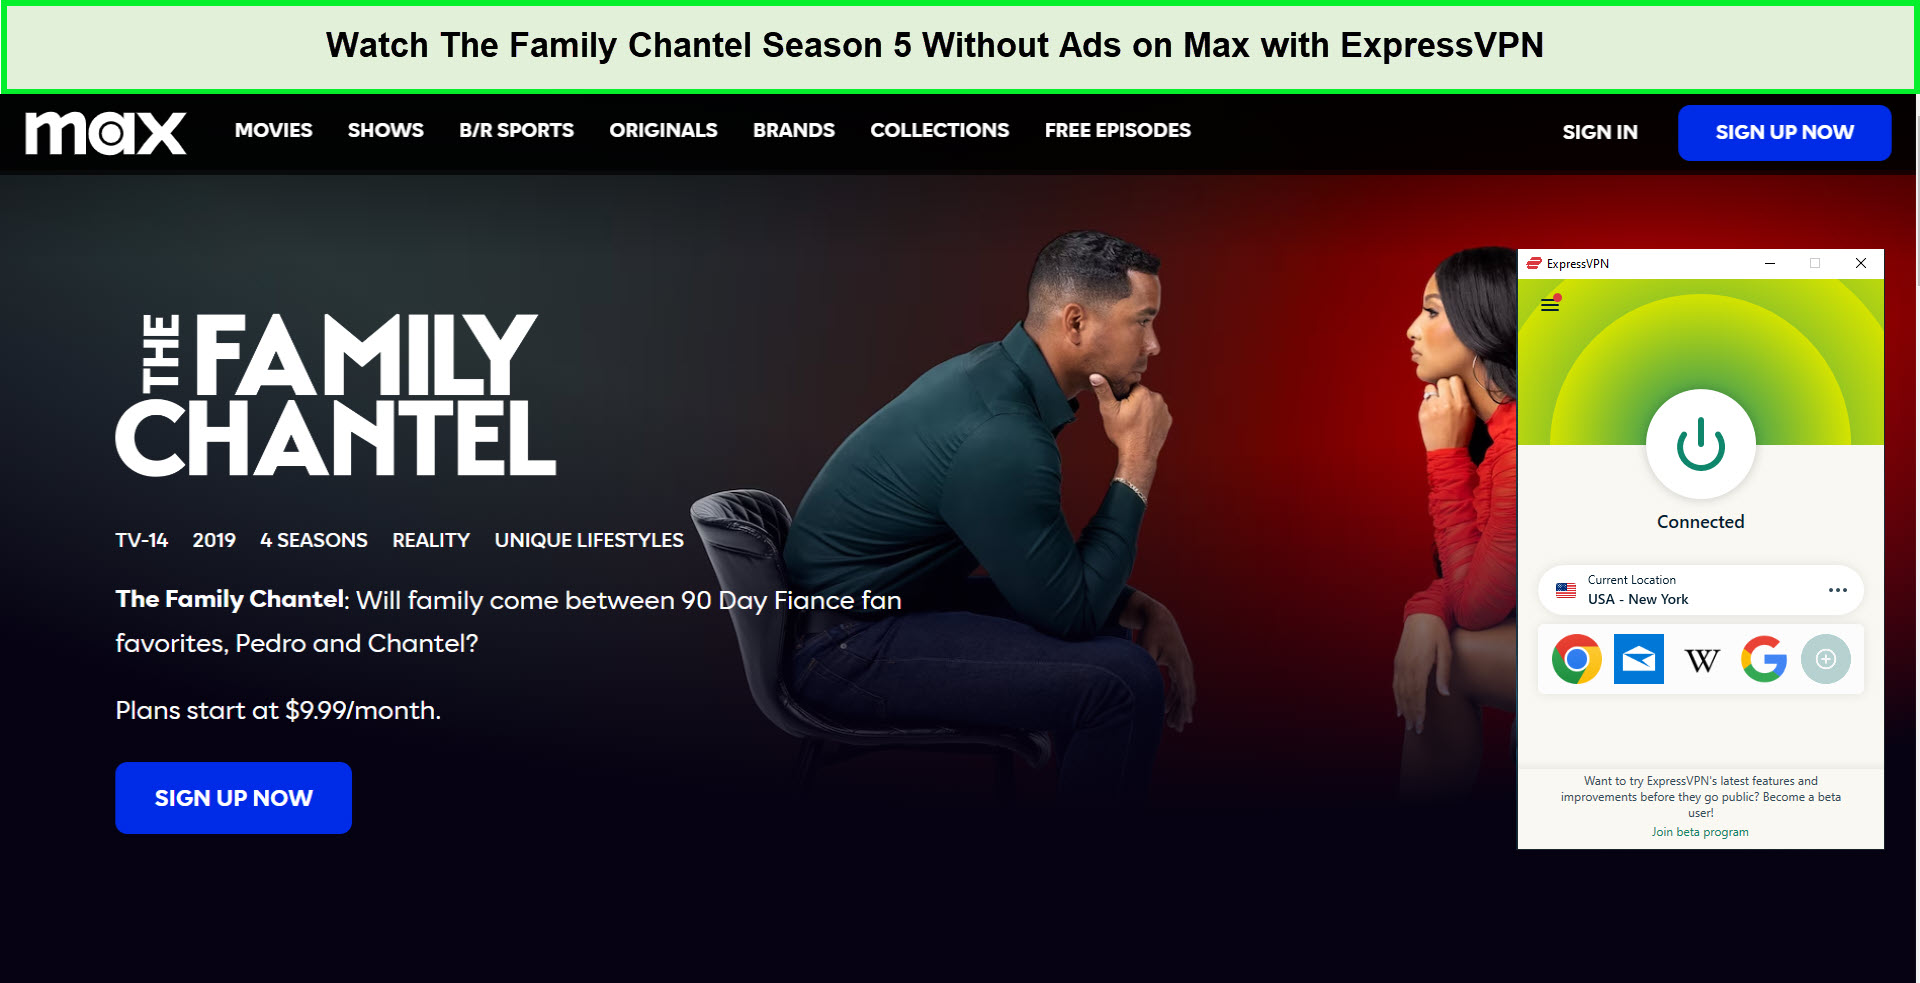 Watch-The-Family-Chantel-Season-5-Without-Ads-in-France-On-Max-with-ExpressPN